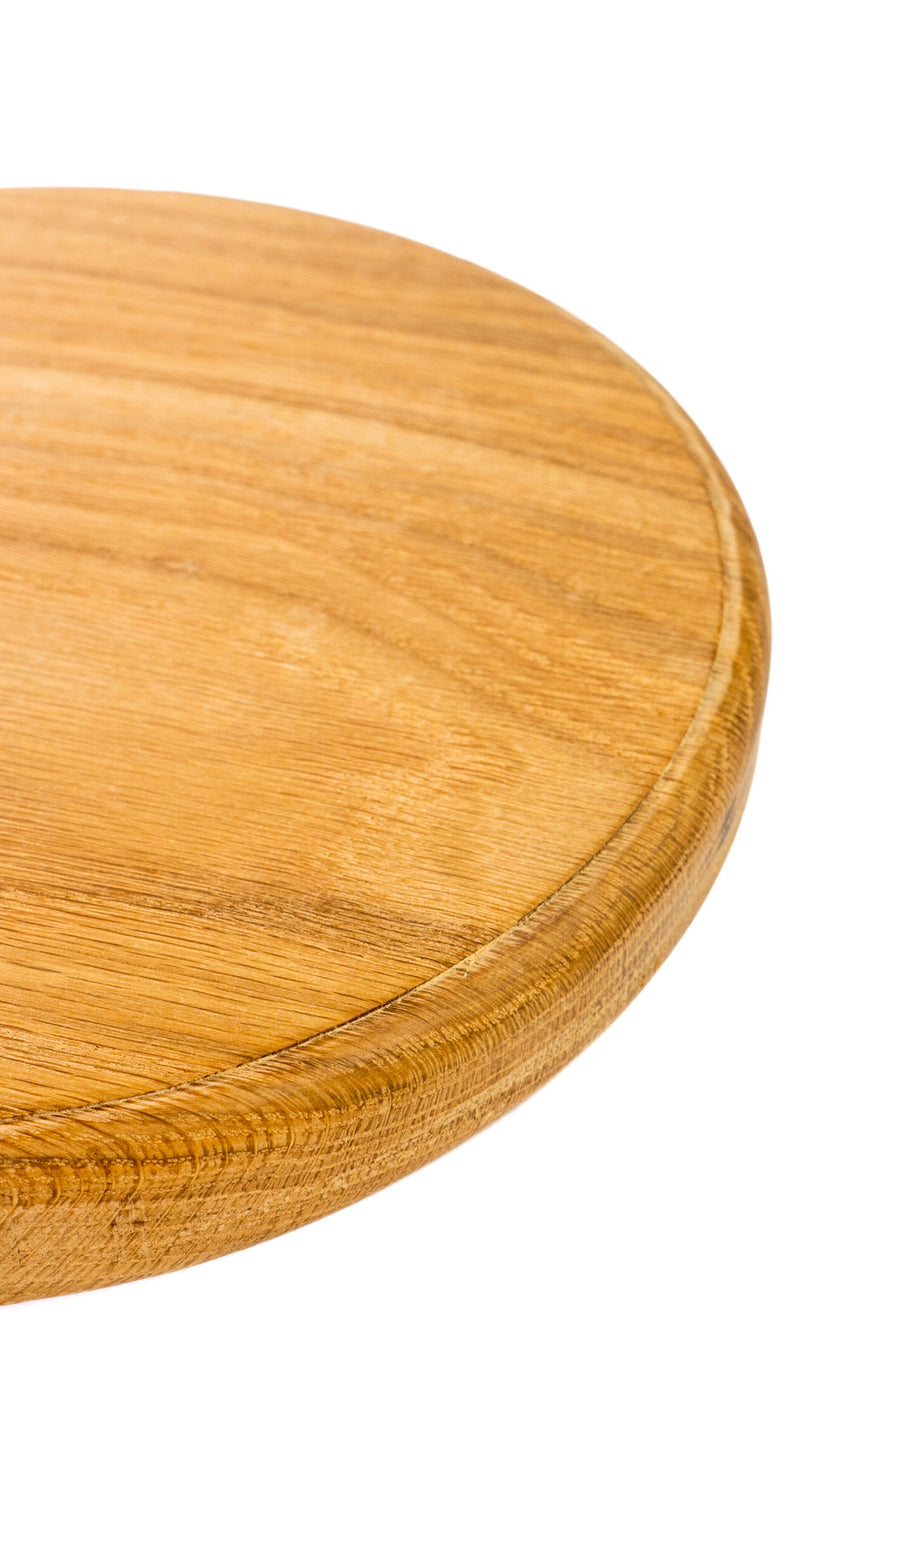 White Oak Circular Charcuterie Board by Bearded Ginger Woodworking